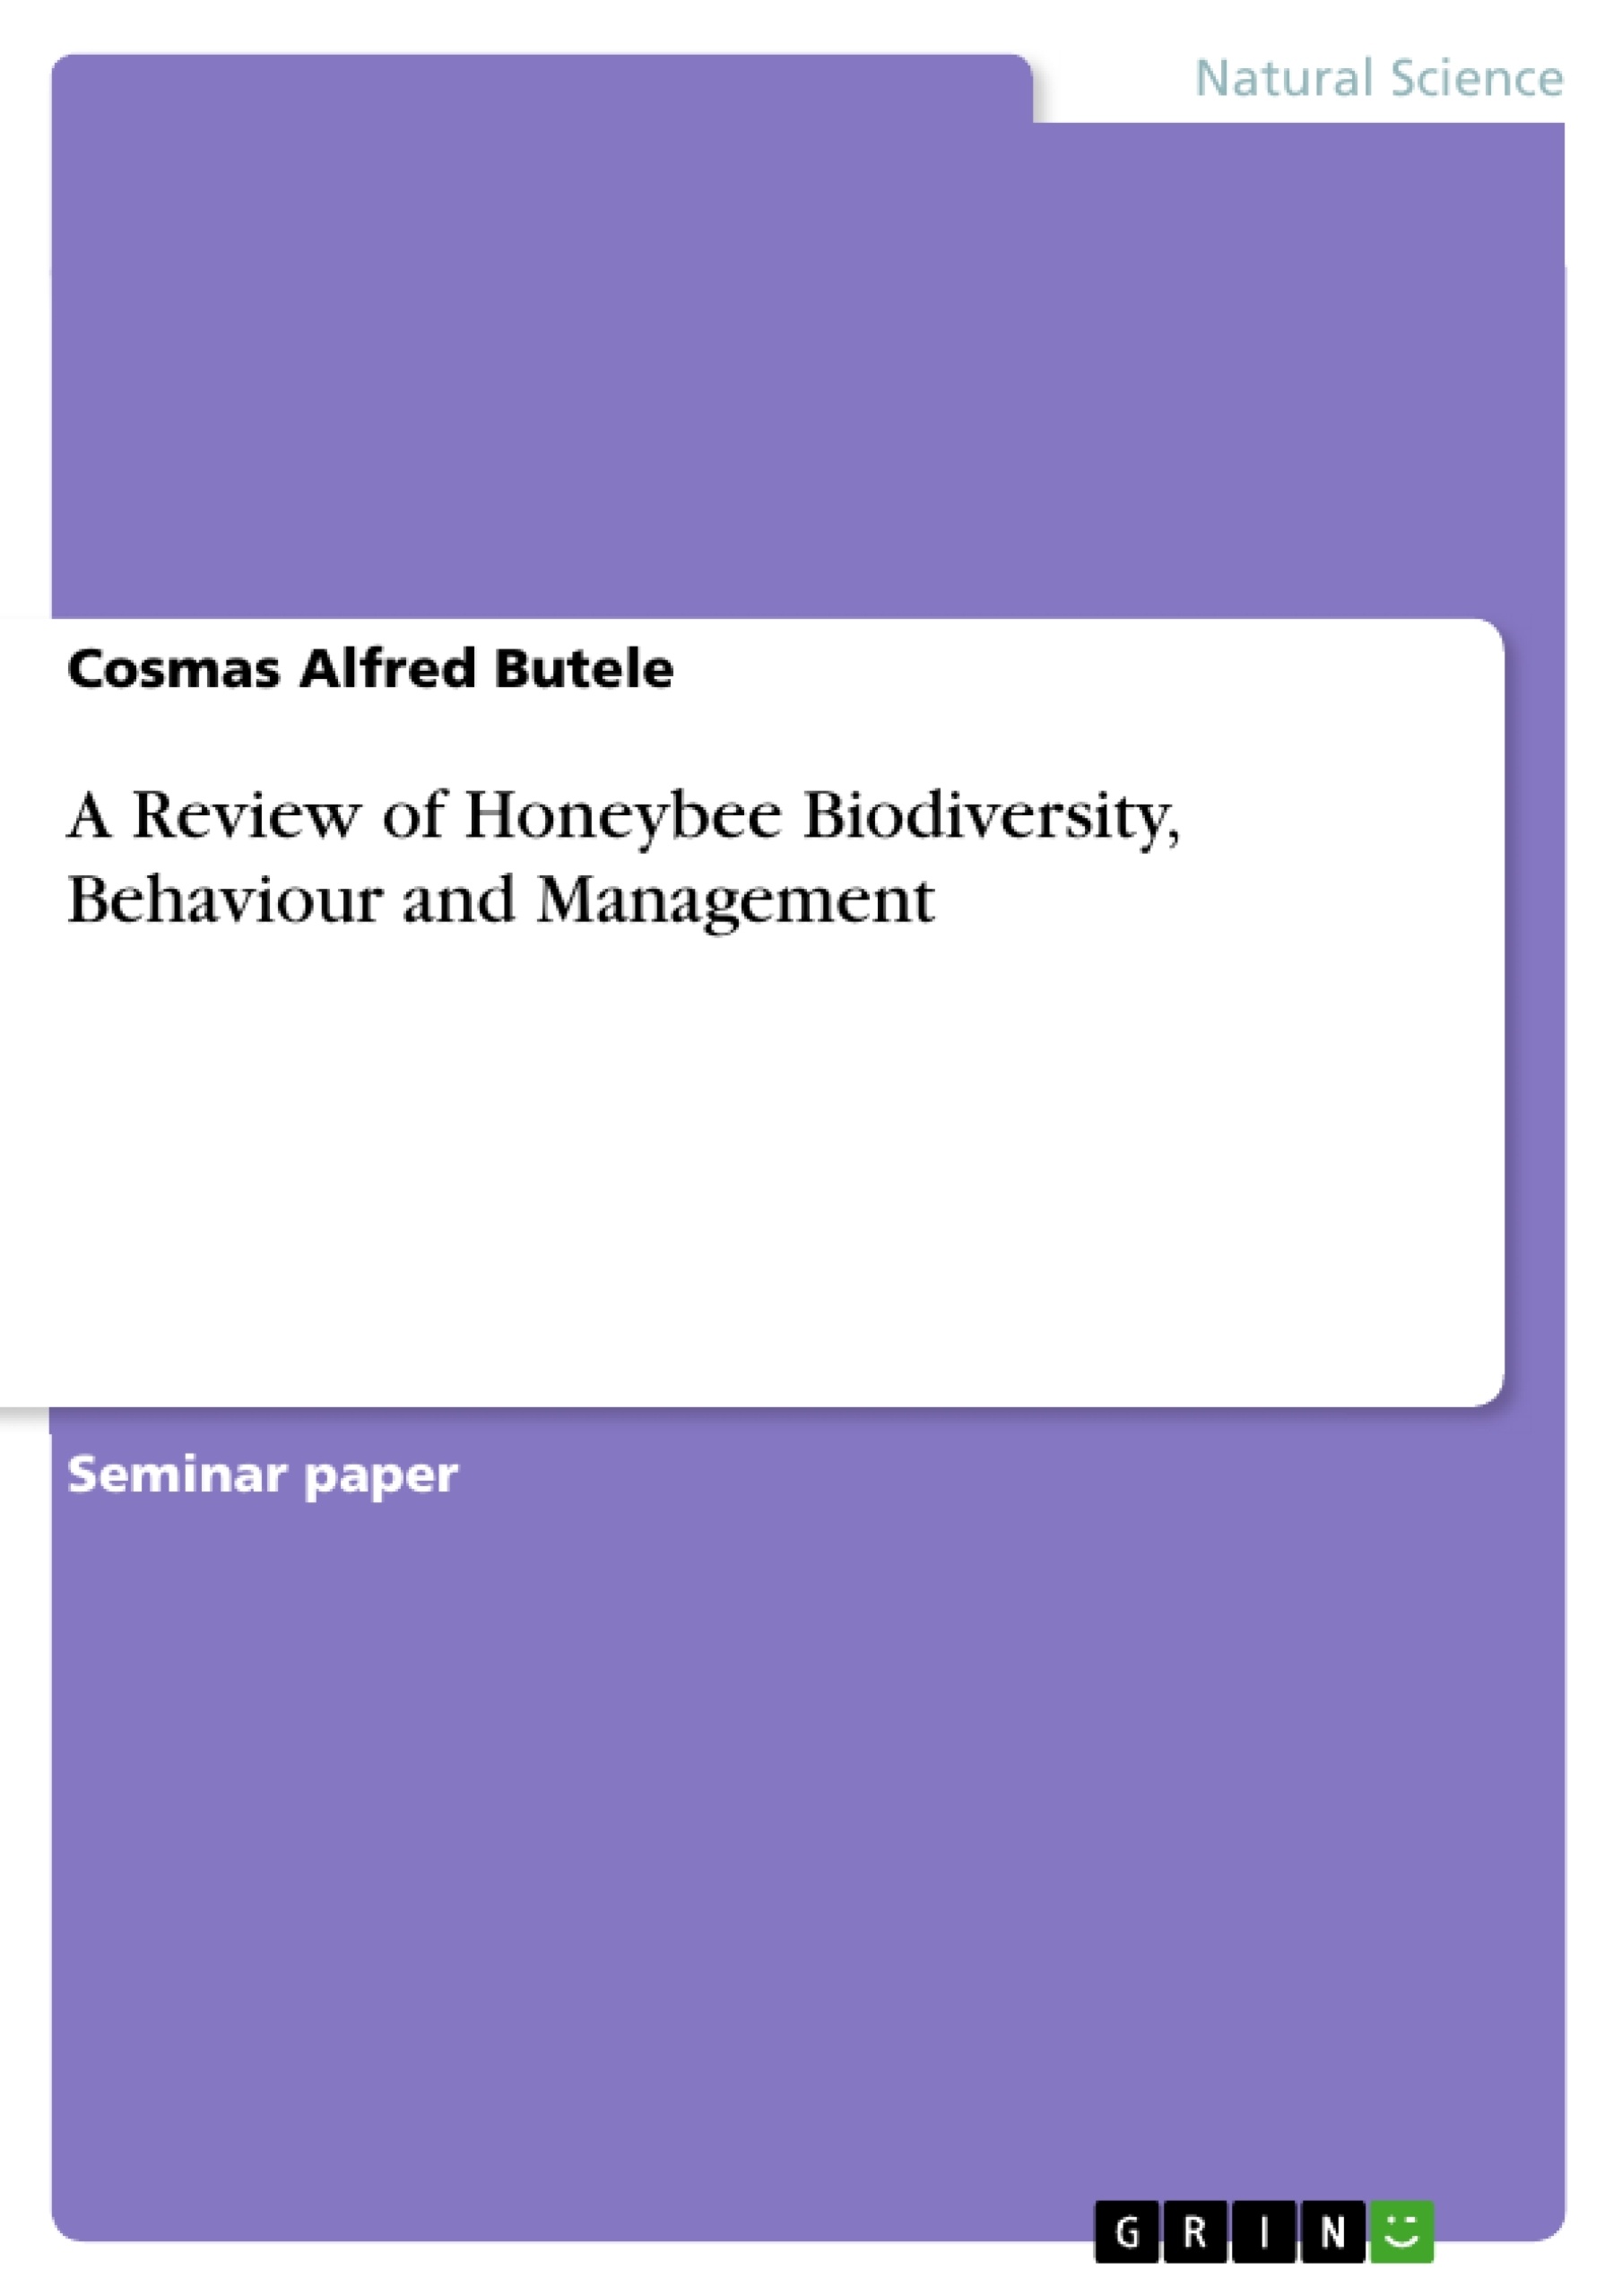 Título: A Review of Honeybee Biodiversity, Behaviour and Management